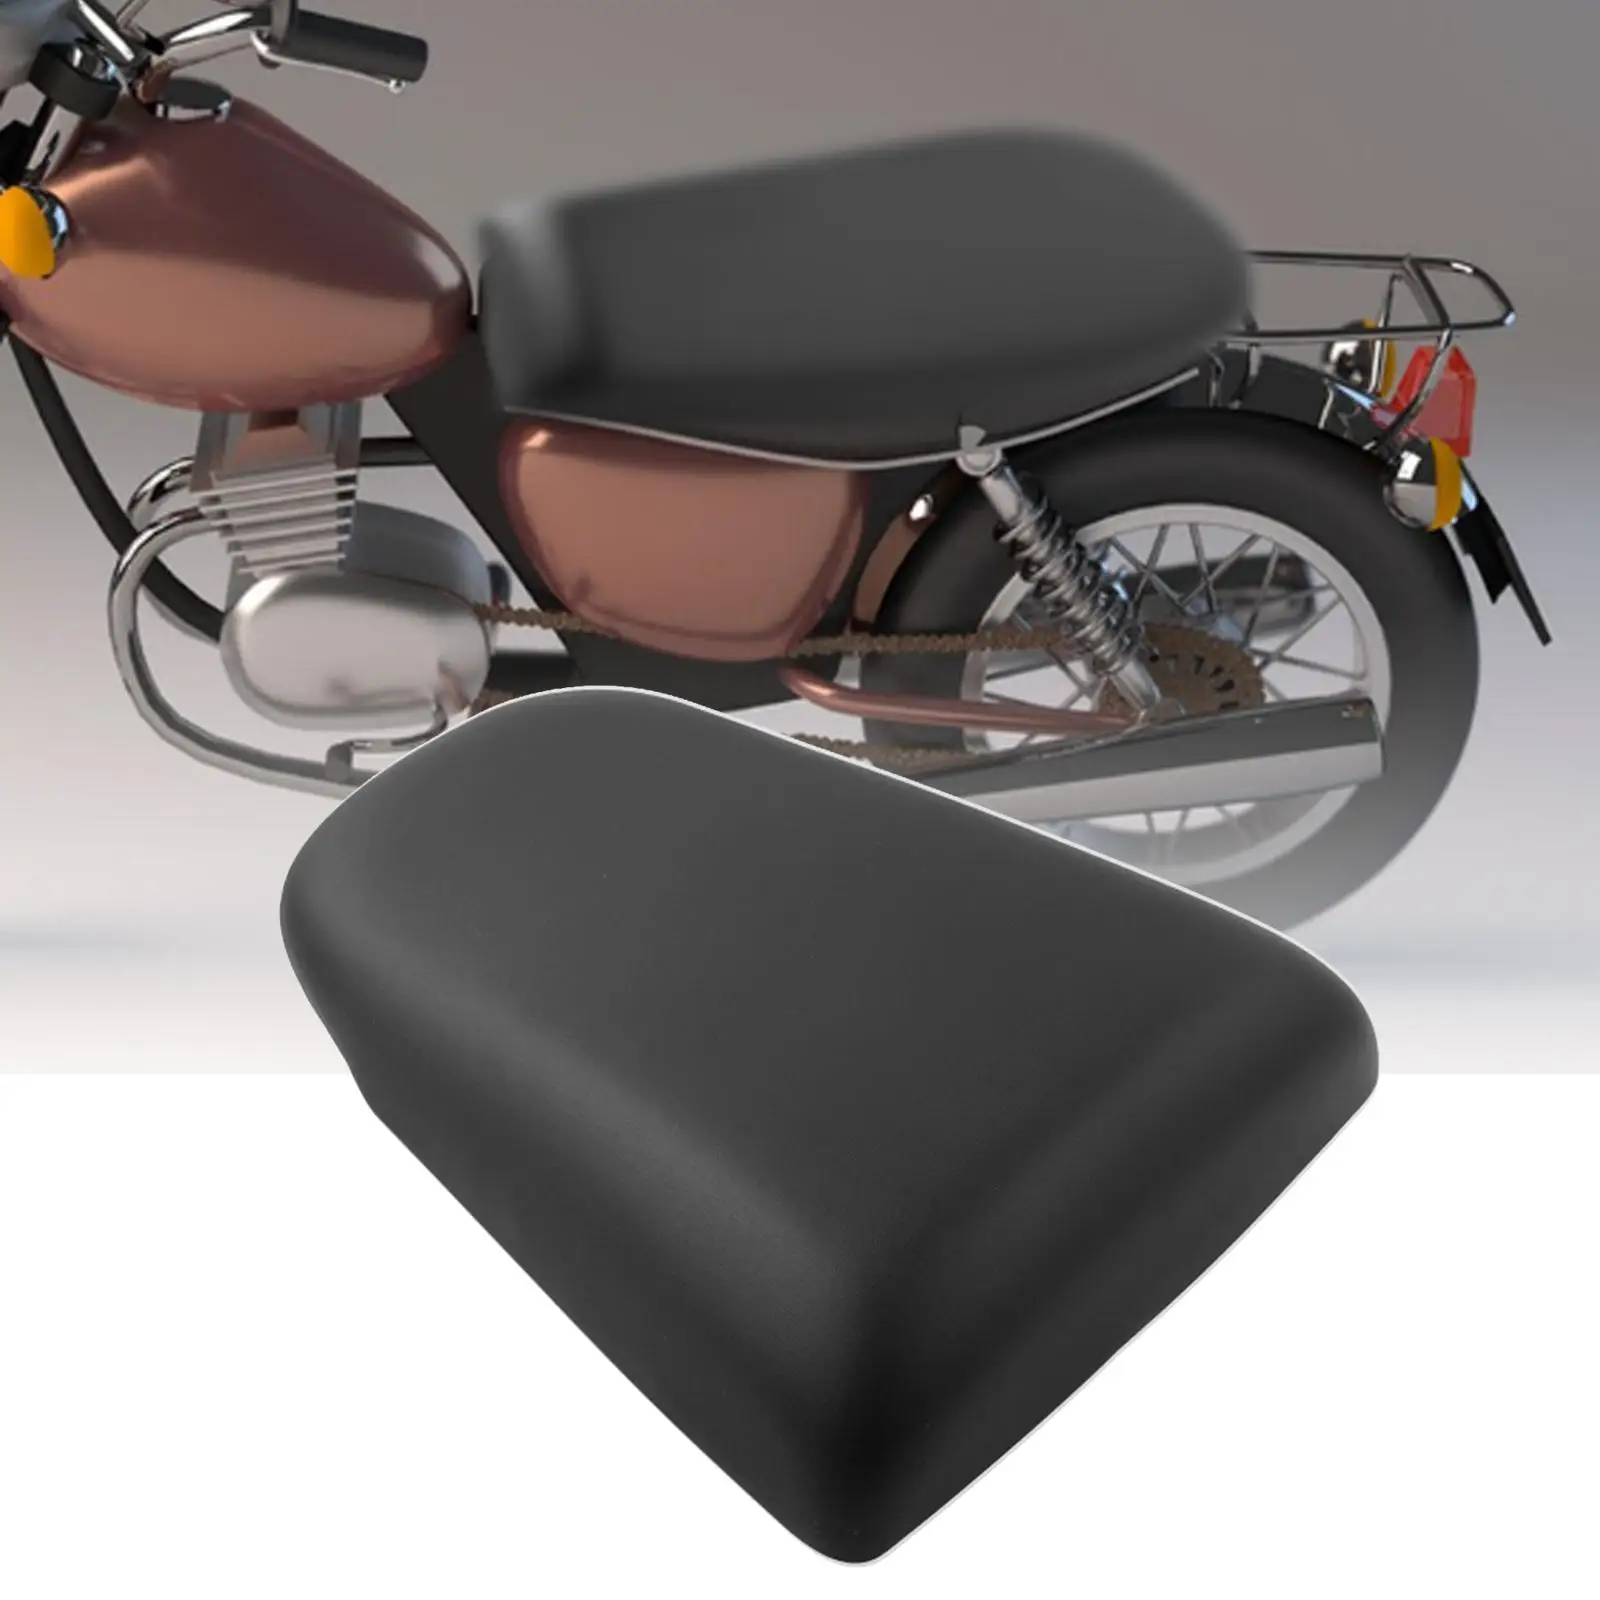 Motorcycle Passenger Seat Cushion Spare Parts Practical for Suzuki 2003 to 2007